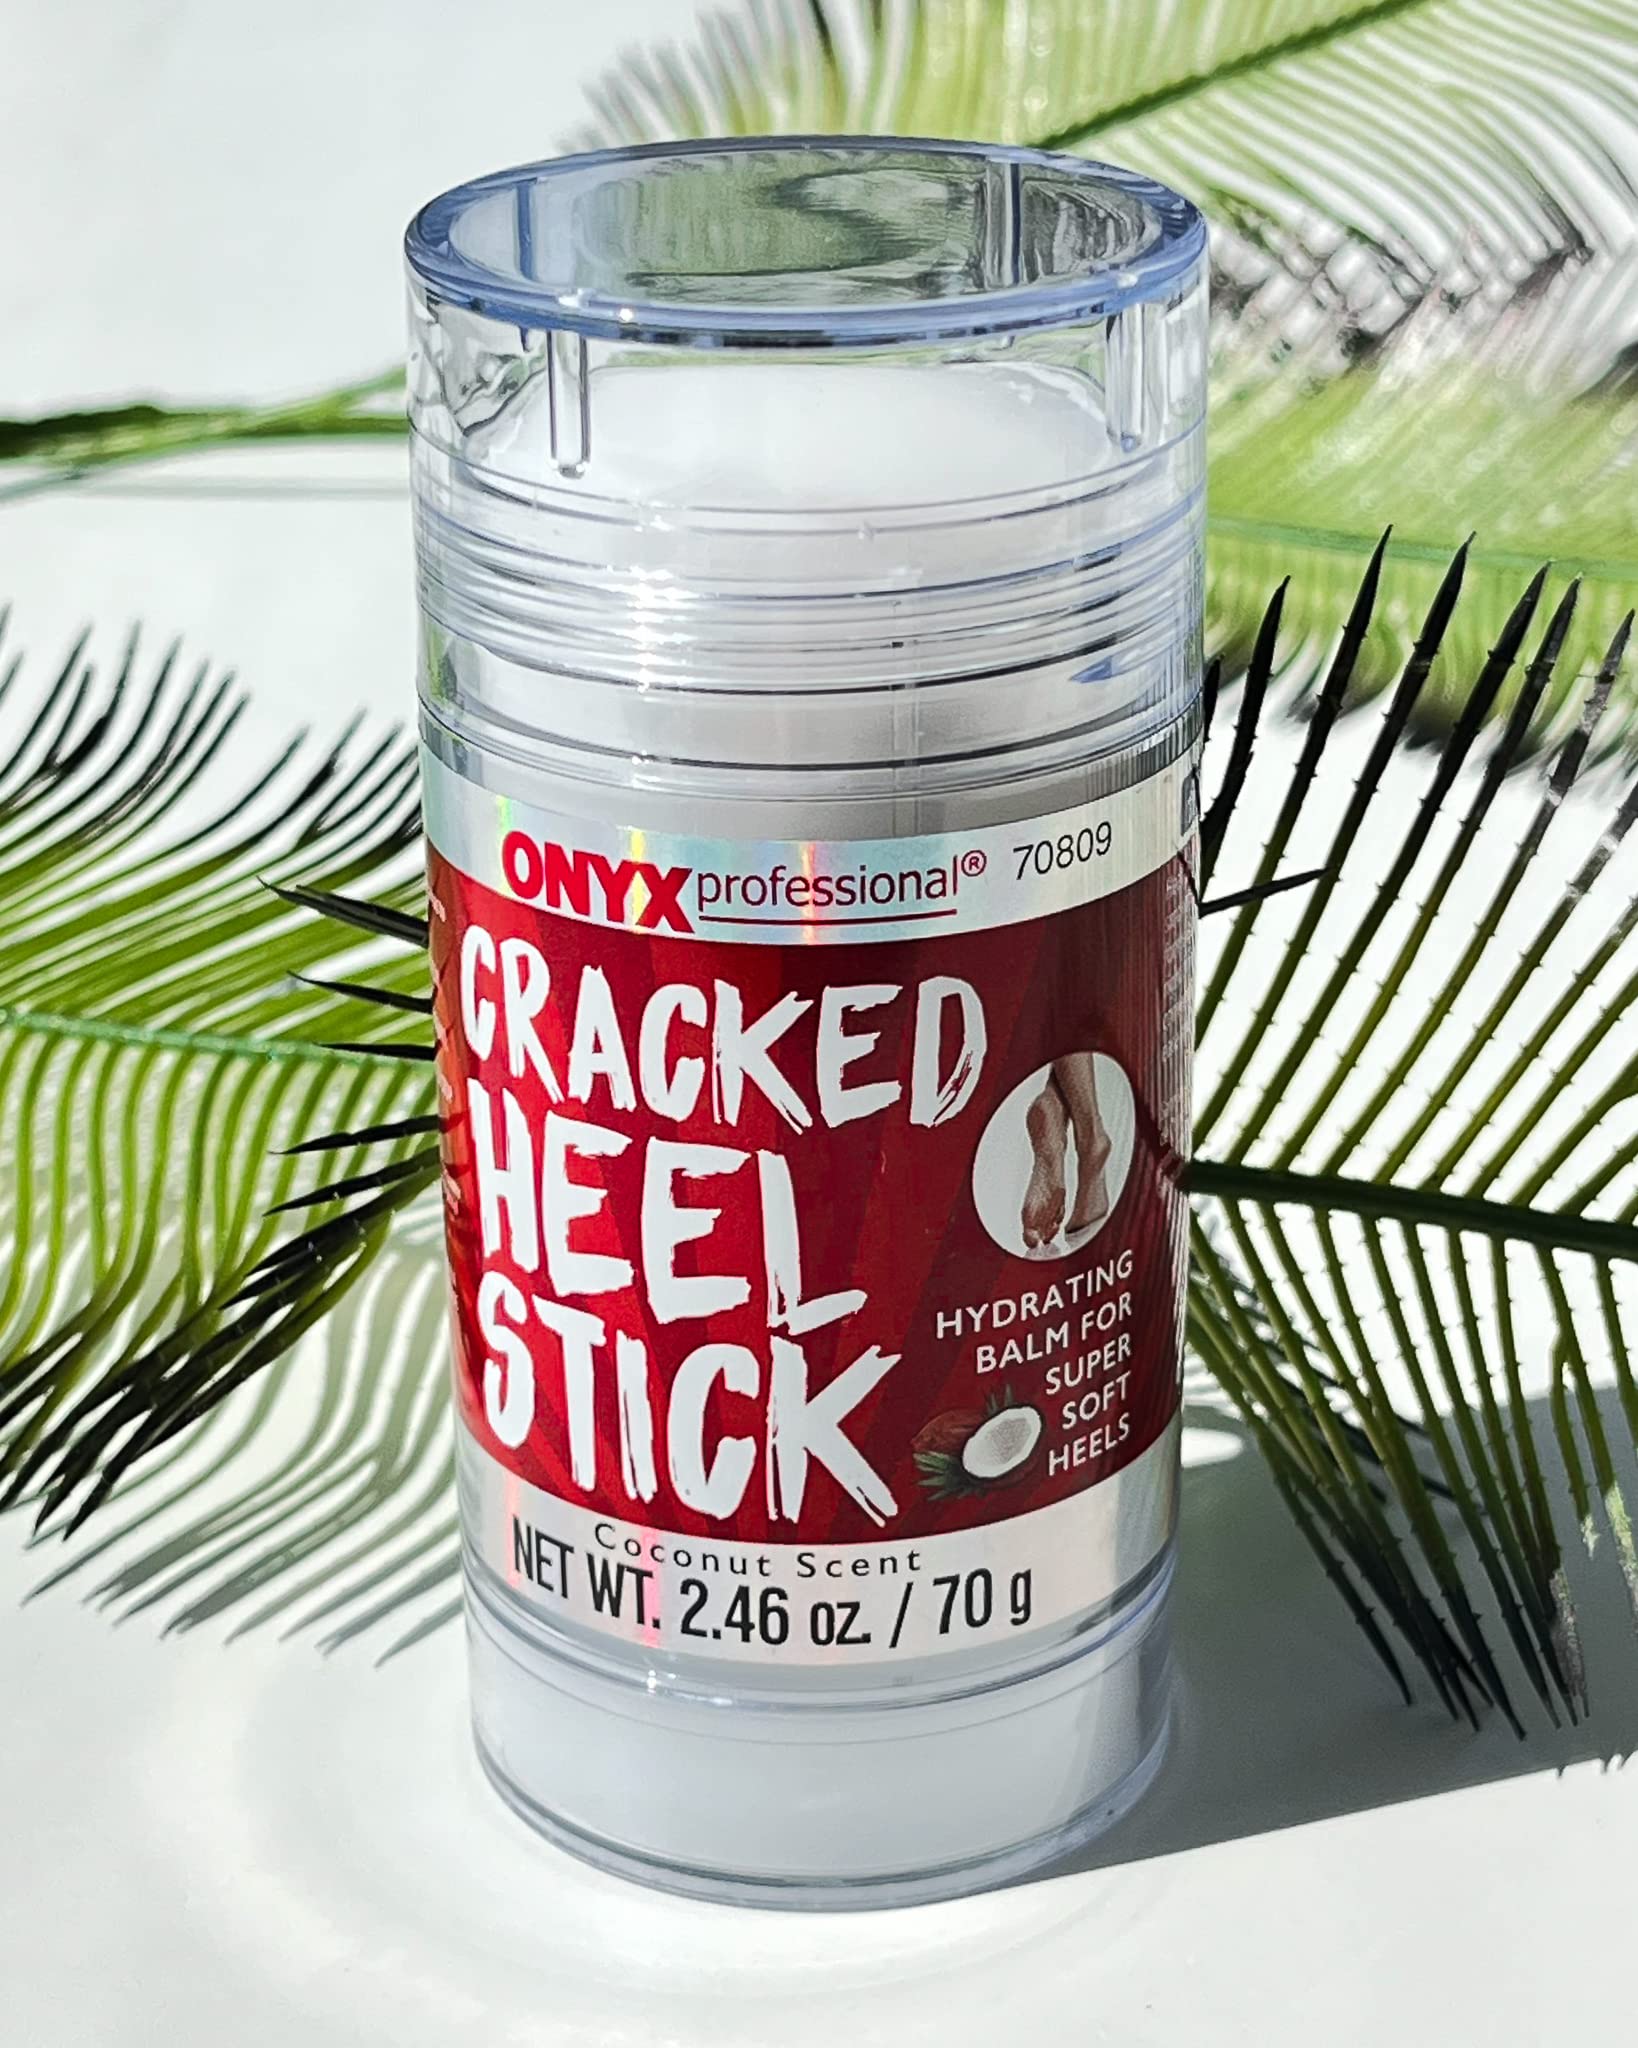 Onyx Professional Cracked Heel Repair Balm Stick (2 Pack) Dry Cracked Feet Treatment, Moisturizing Heel Balm Rolls On So No Mess Like Foot Cream or Foot Lotion, Rescues Cracked Feet for Skin So Soft